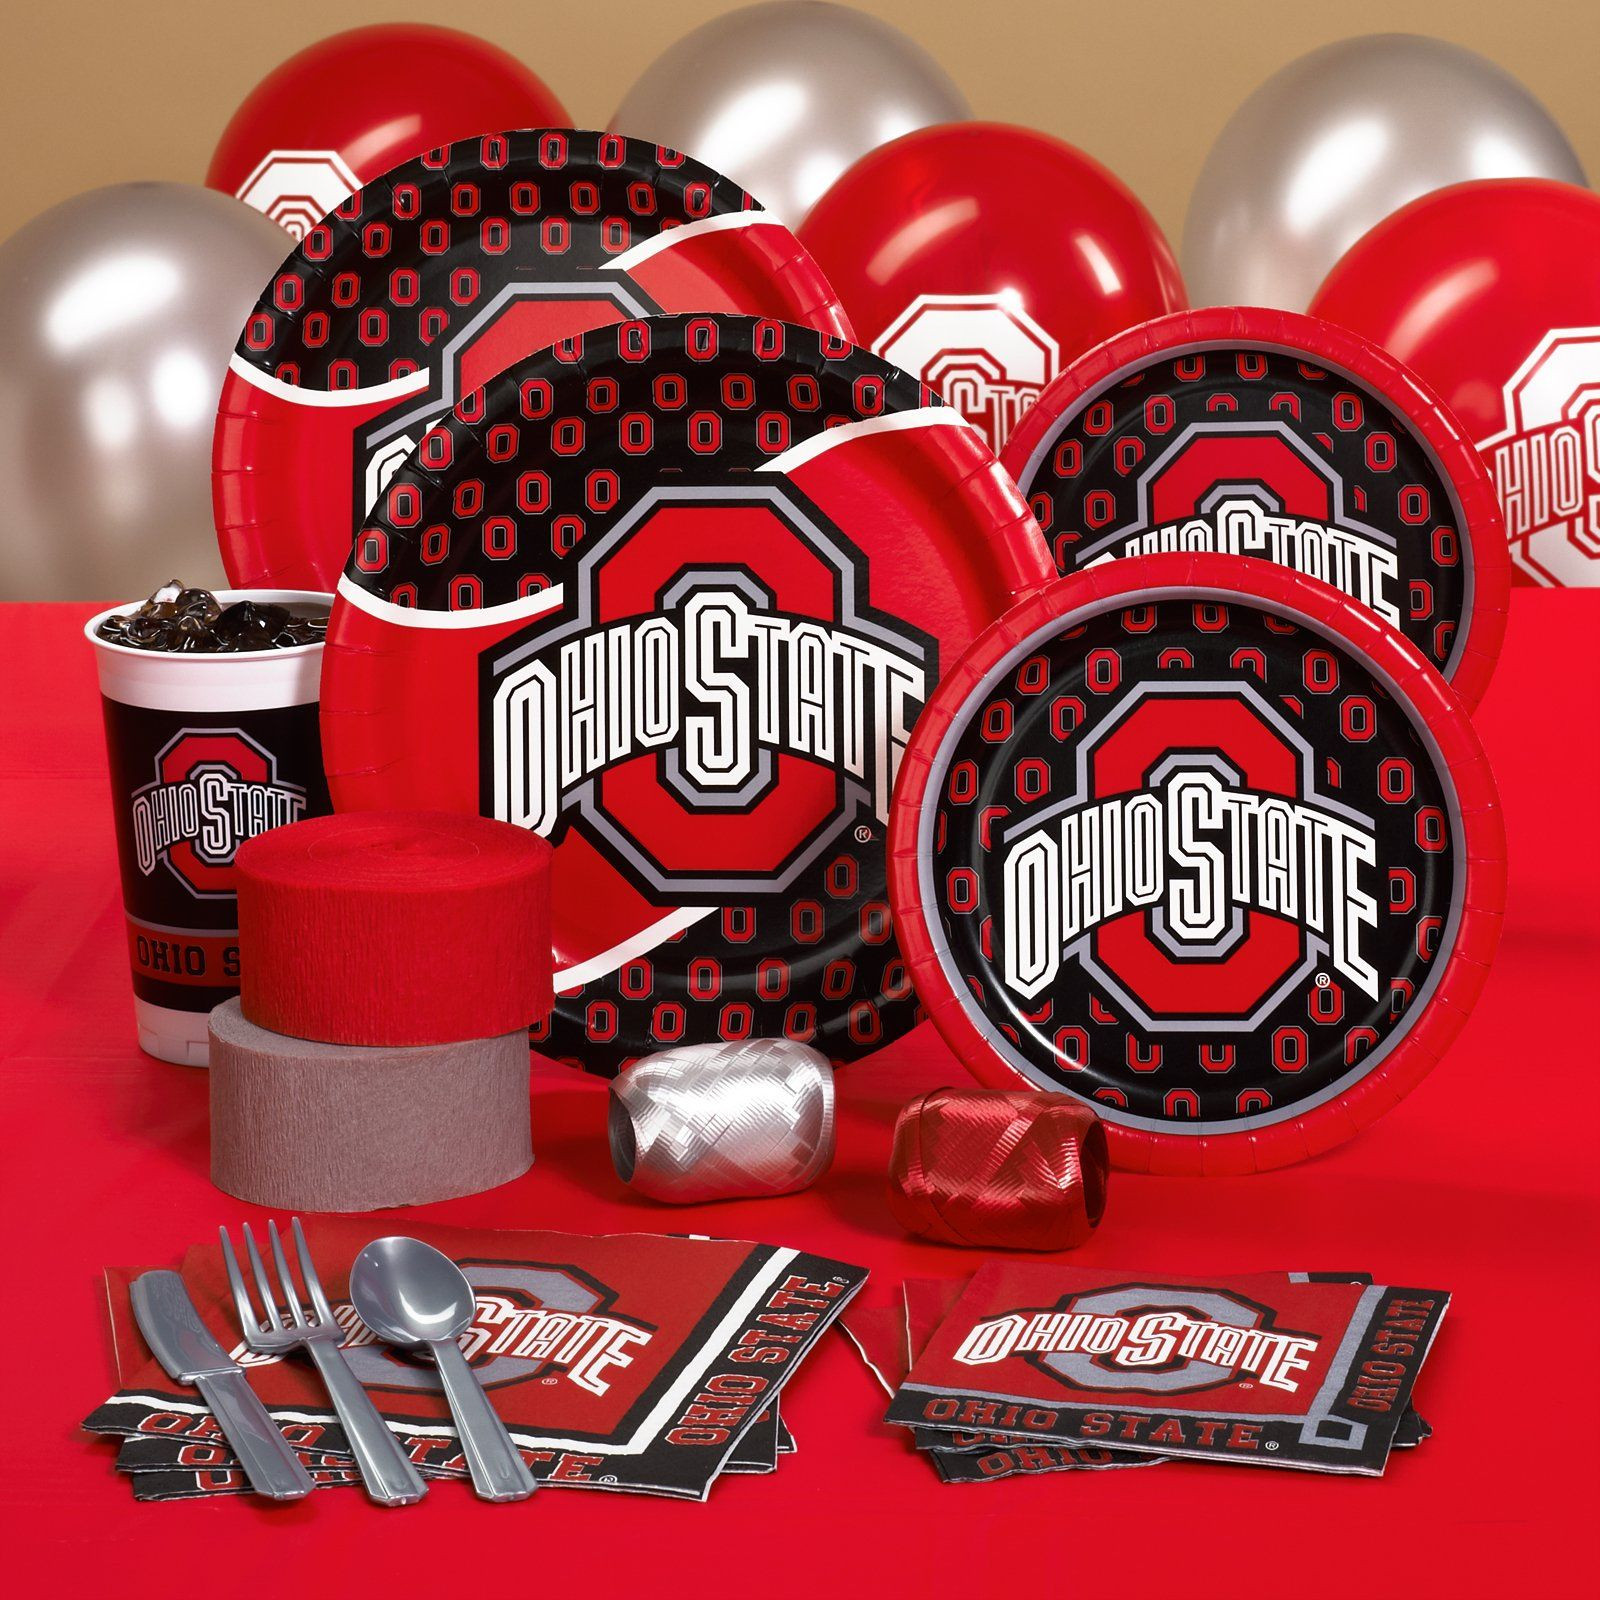 Ohio State Graduation Party Ideas
 Ohio State Can t wait to tailgate